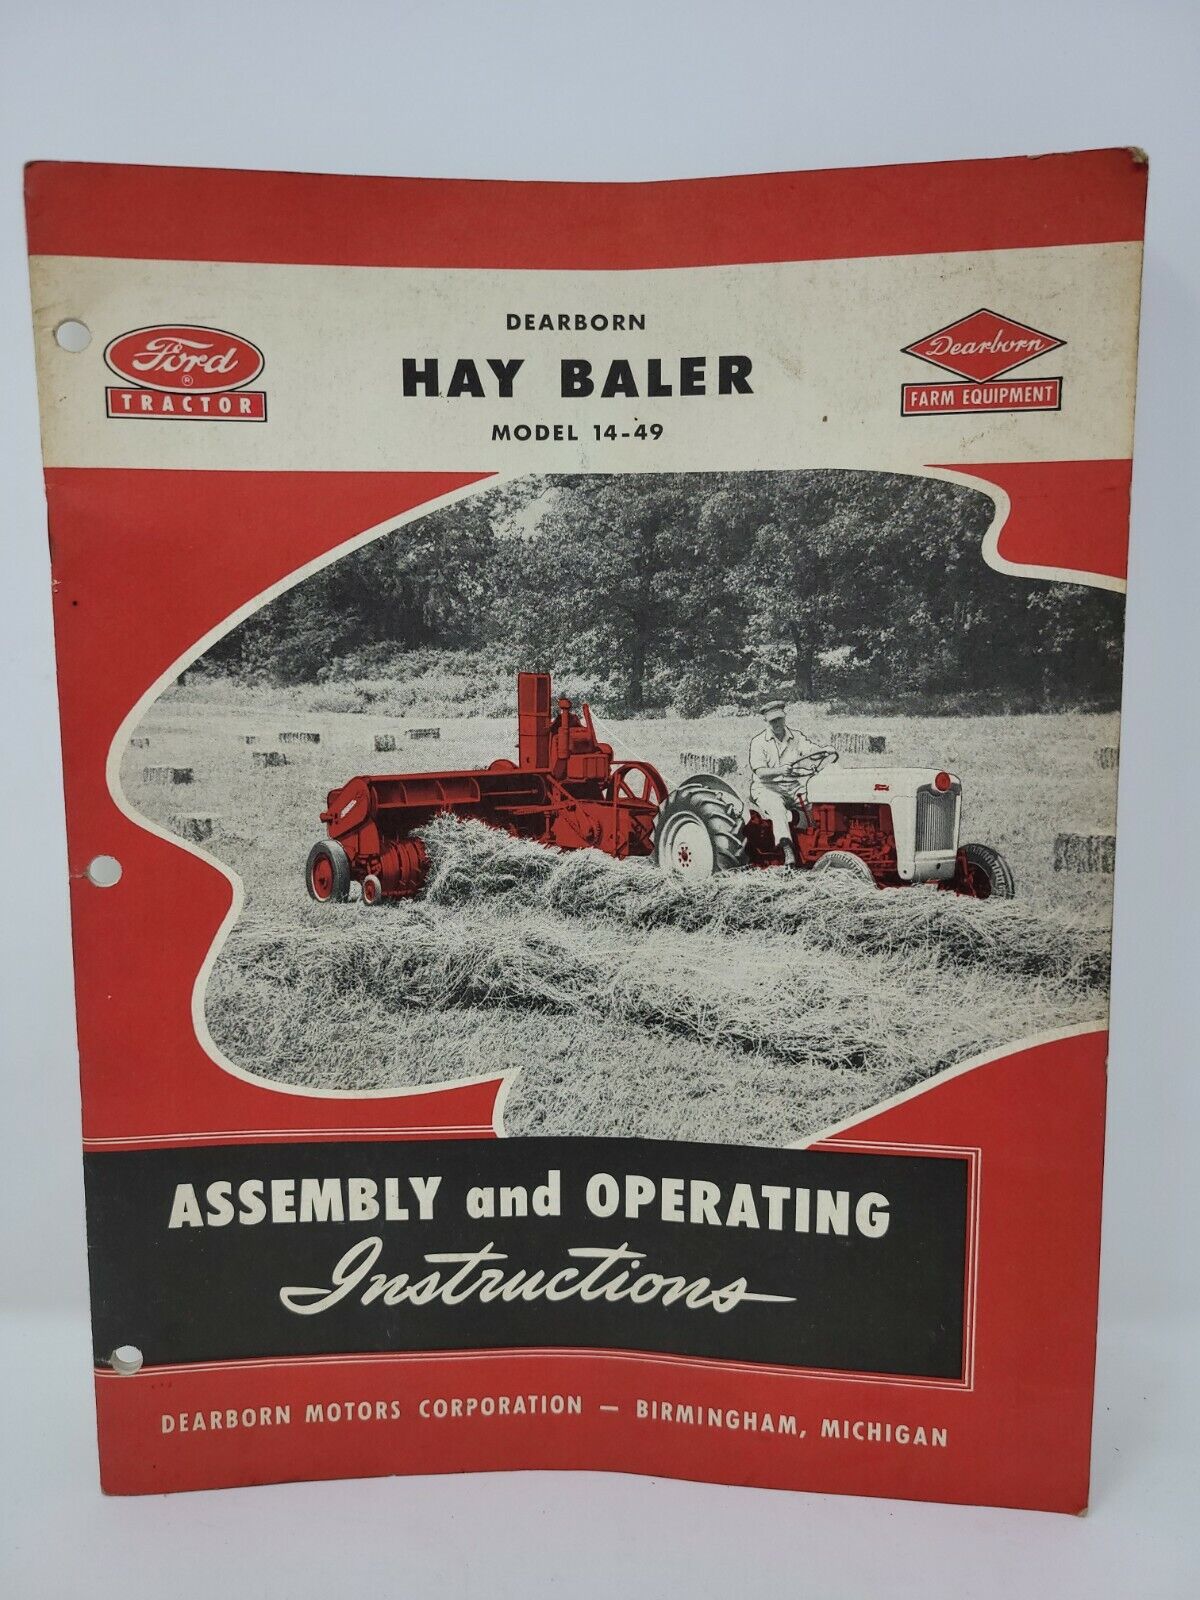 Vintage Dearborn Ford Hay Baler Model 14-49 Assembly and Operating Instructions